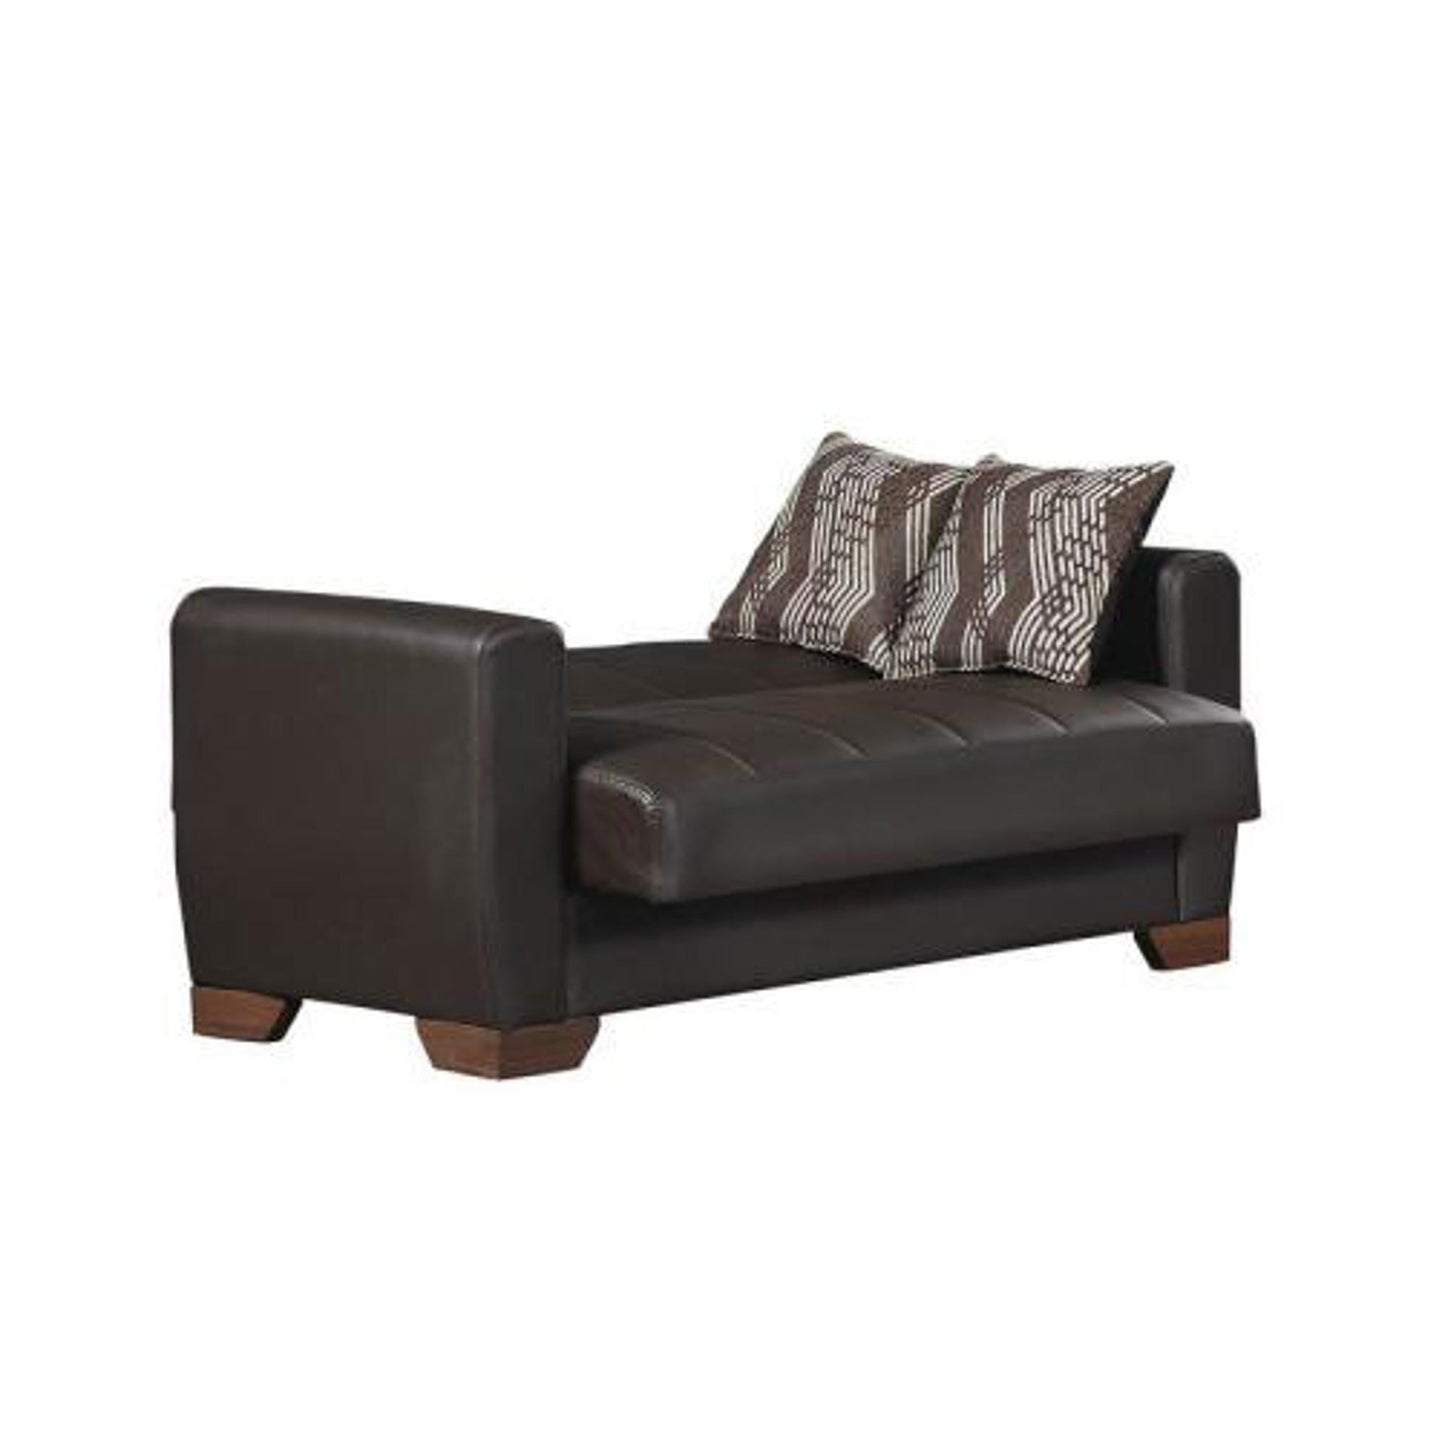 Barato Convertible Loveseat in Brown PU Leather